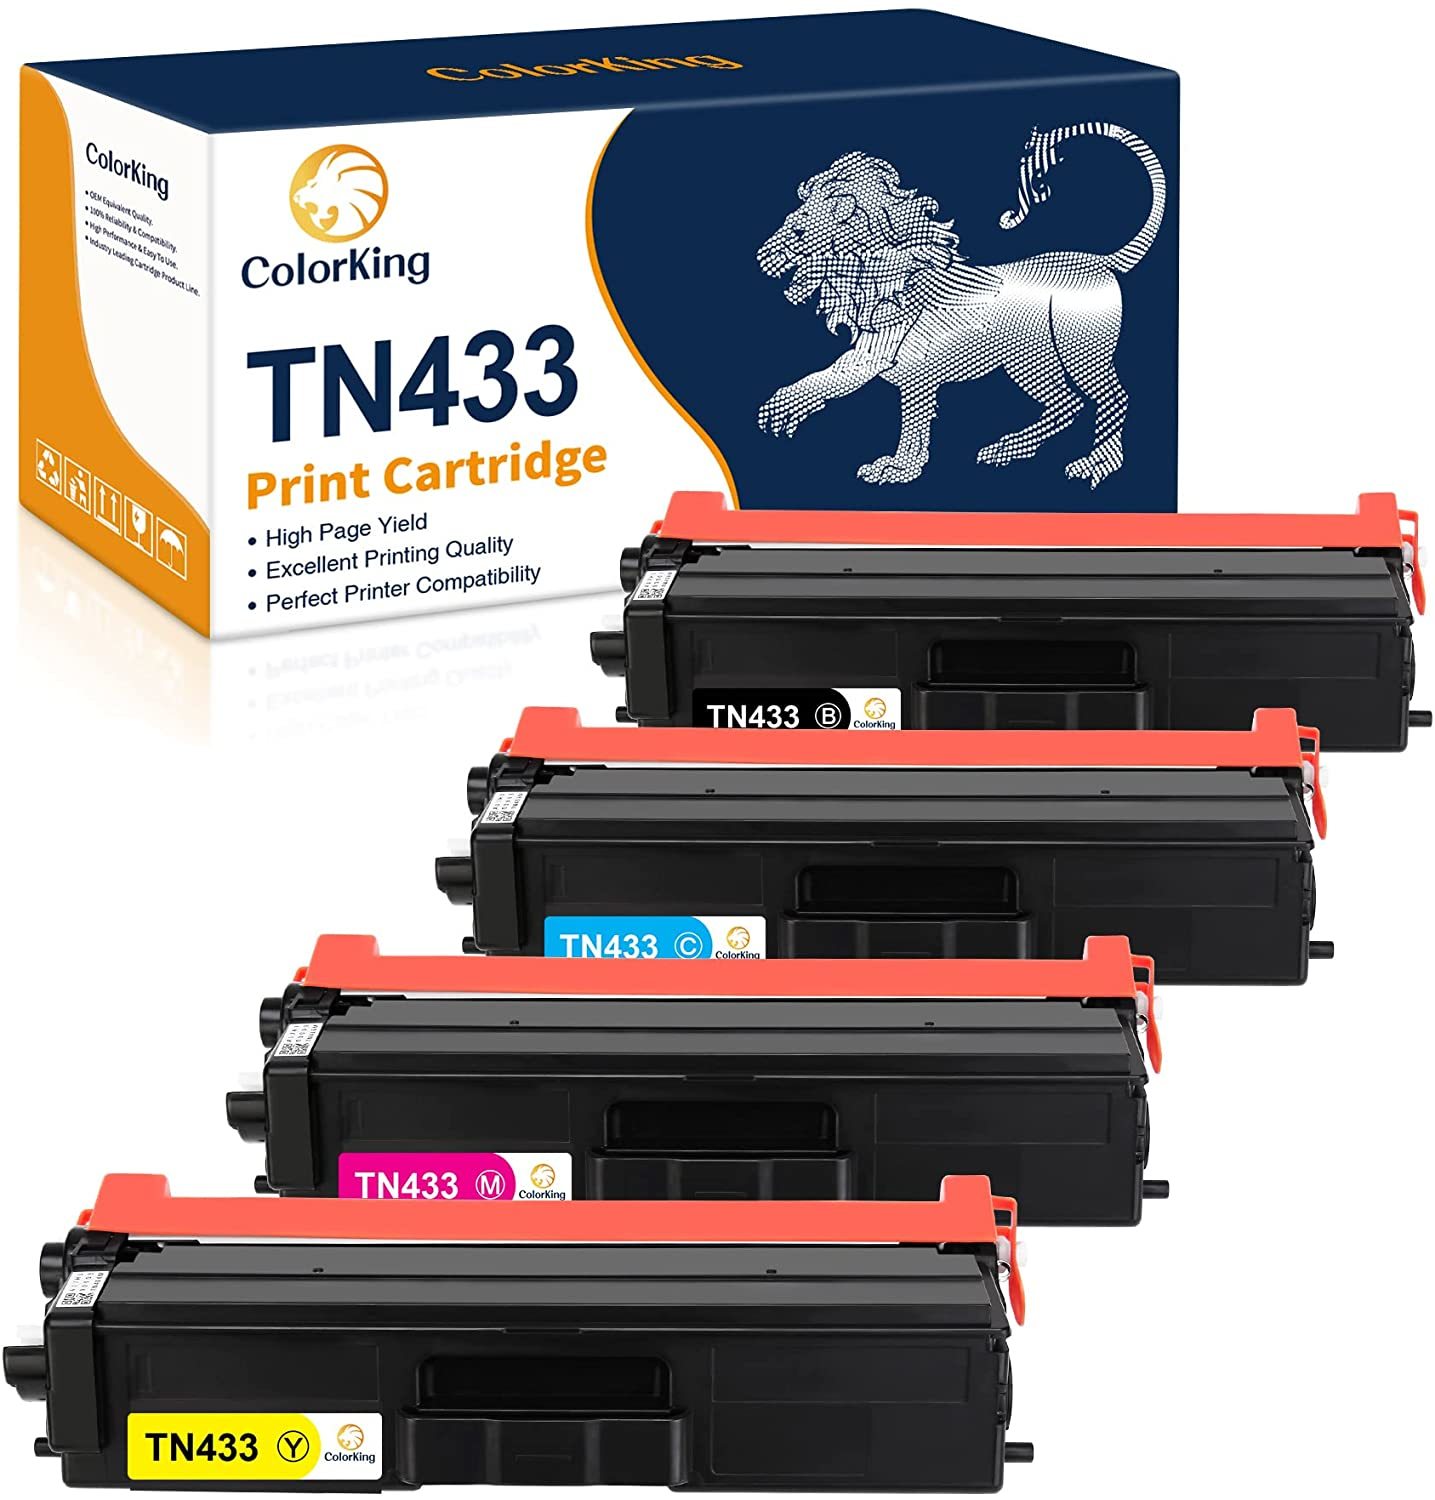 Primary image for Colorking Compatible Toner Cartridge Replacement For Brother Tn433, 4 Pack